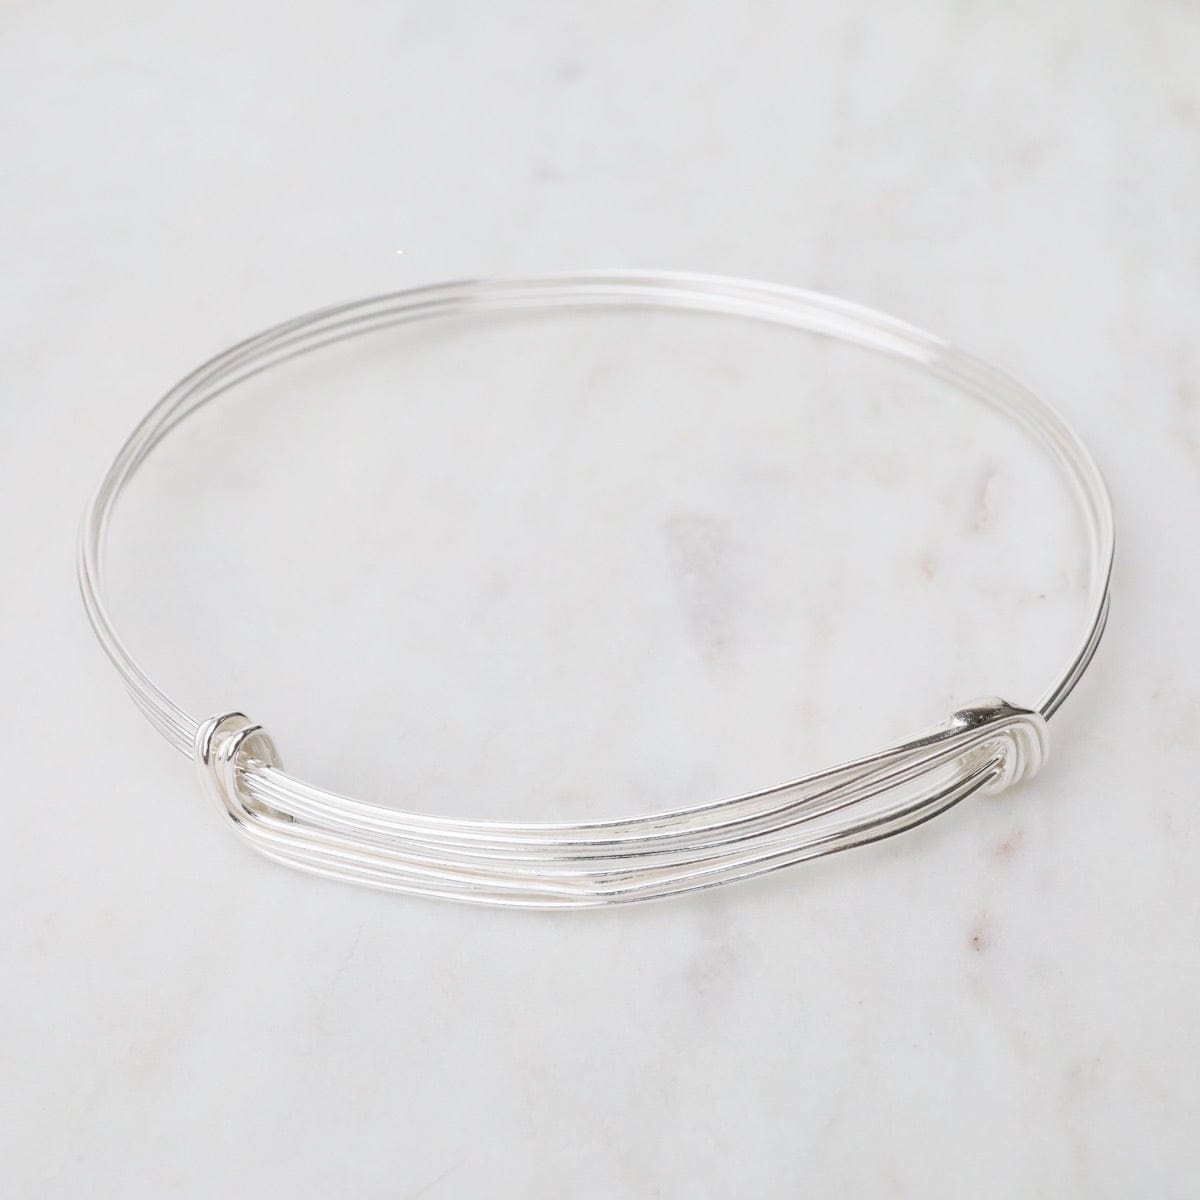 BRC Elephant Hair Inspired Bangle - Shiny Sterling Silver - 5 Lines